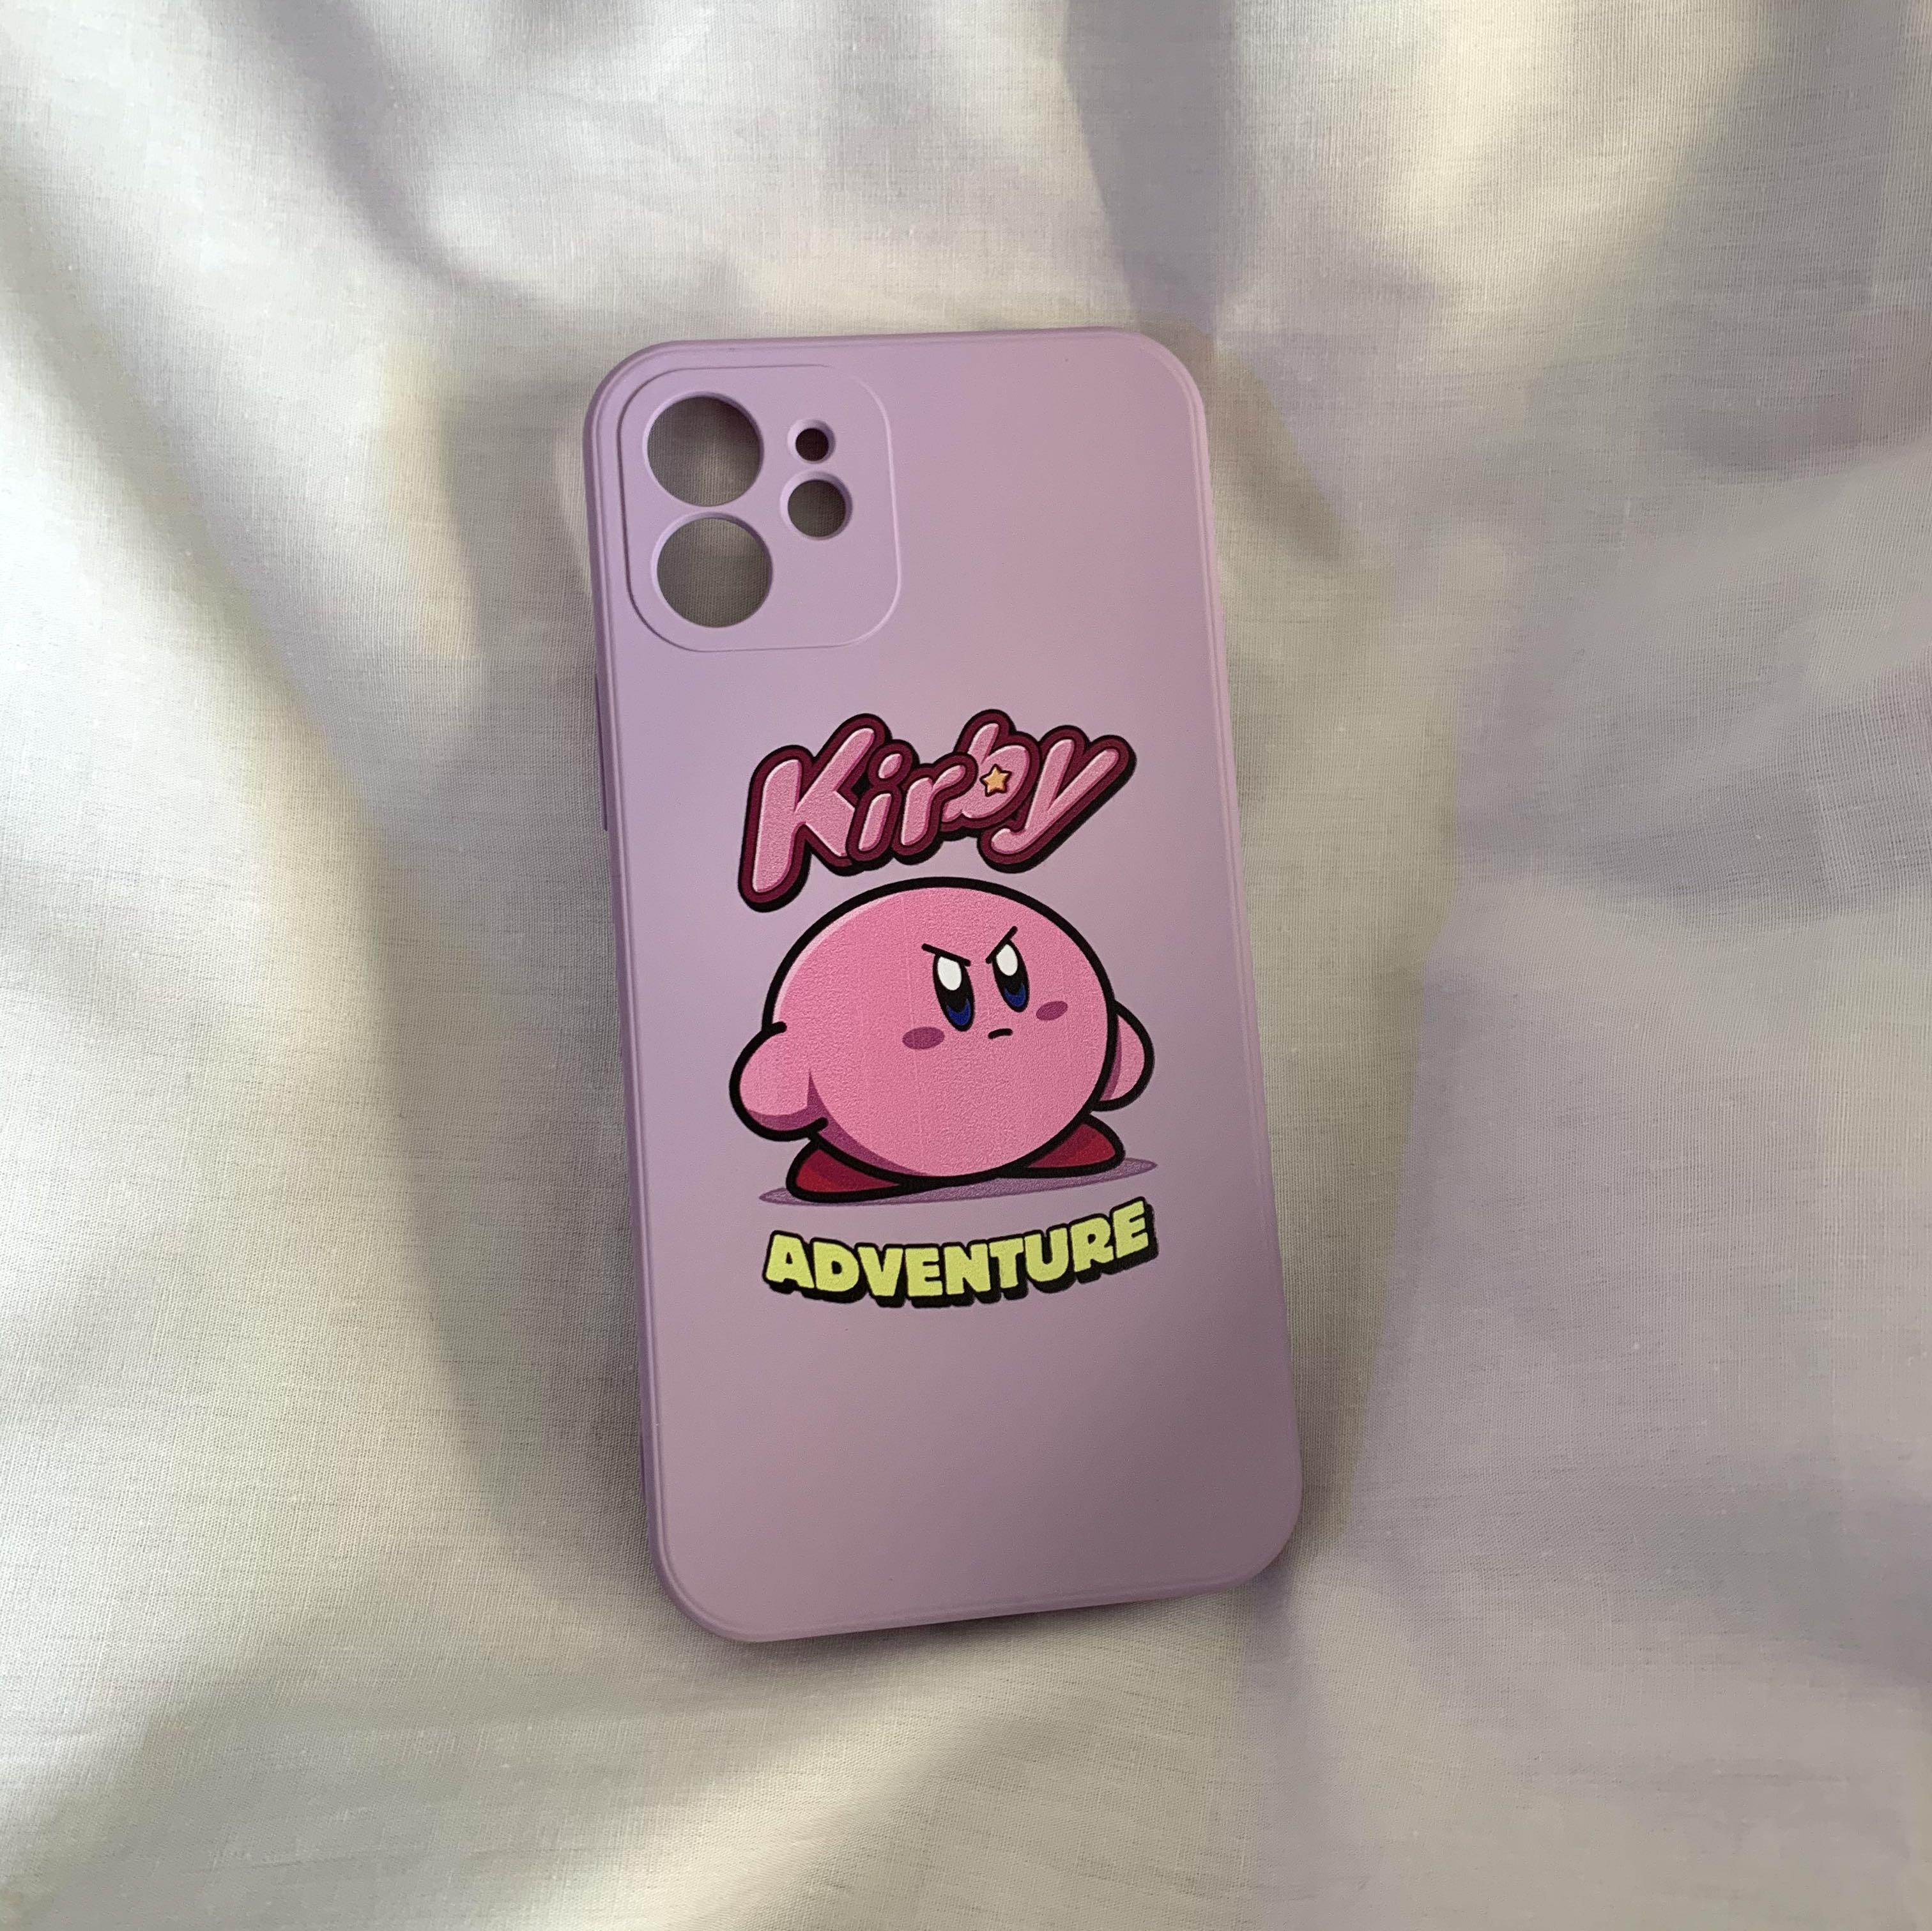 Ulzzang Harajuku Korean Tumblr Basic Aesthetic Cute Pink Kirby Iphone 12 Case Mobile Phones Gadgets Mobile Gadget Accessories Cases Sleeves On Carousell